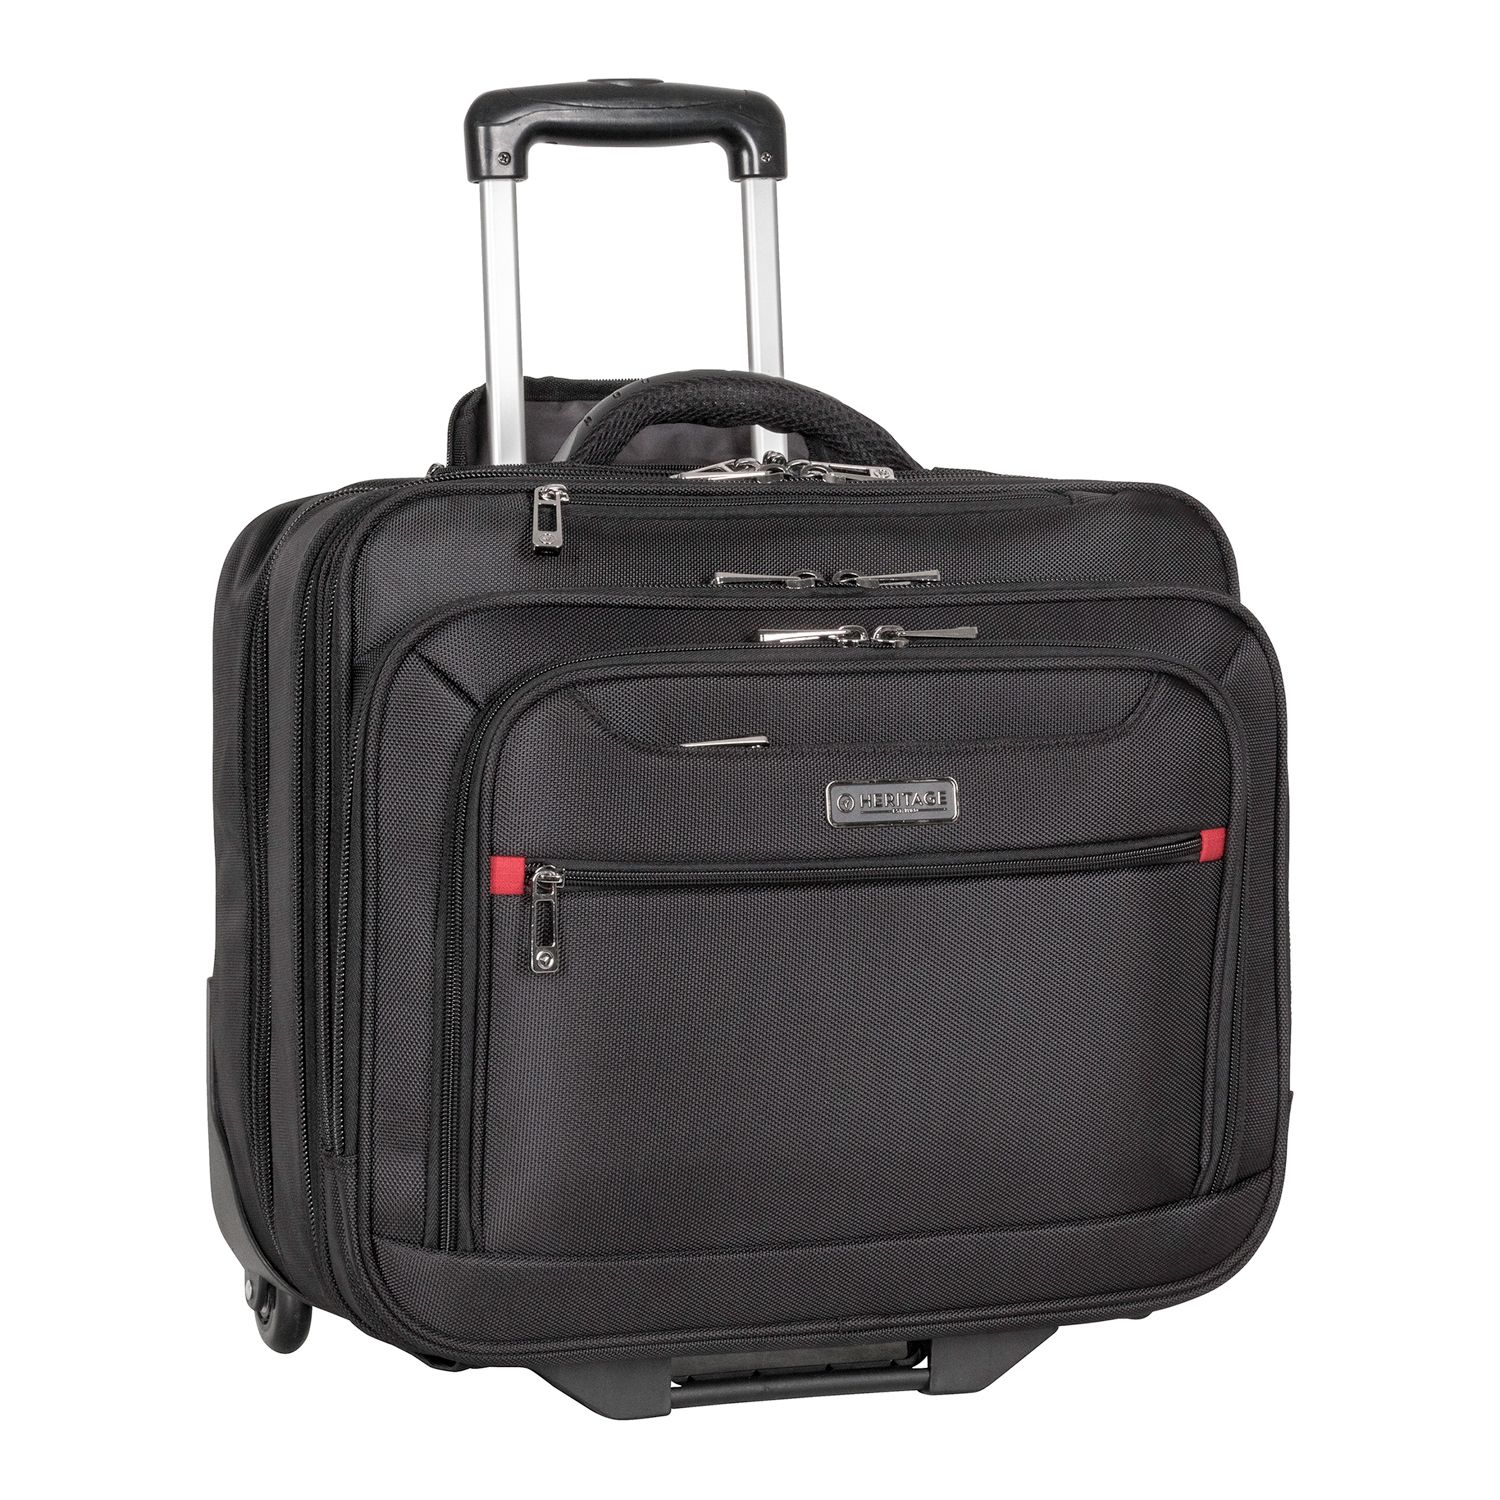 Image for Heritage Triple Compartment Wheeled Laptop Portfolio & Overnighter Bag at Kohl's.